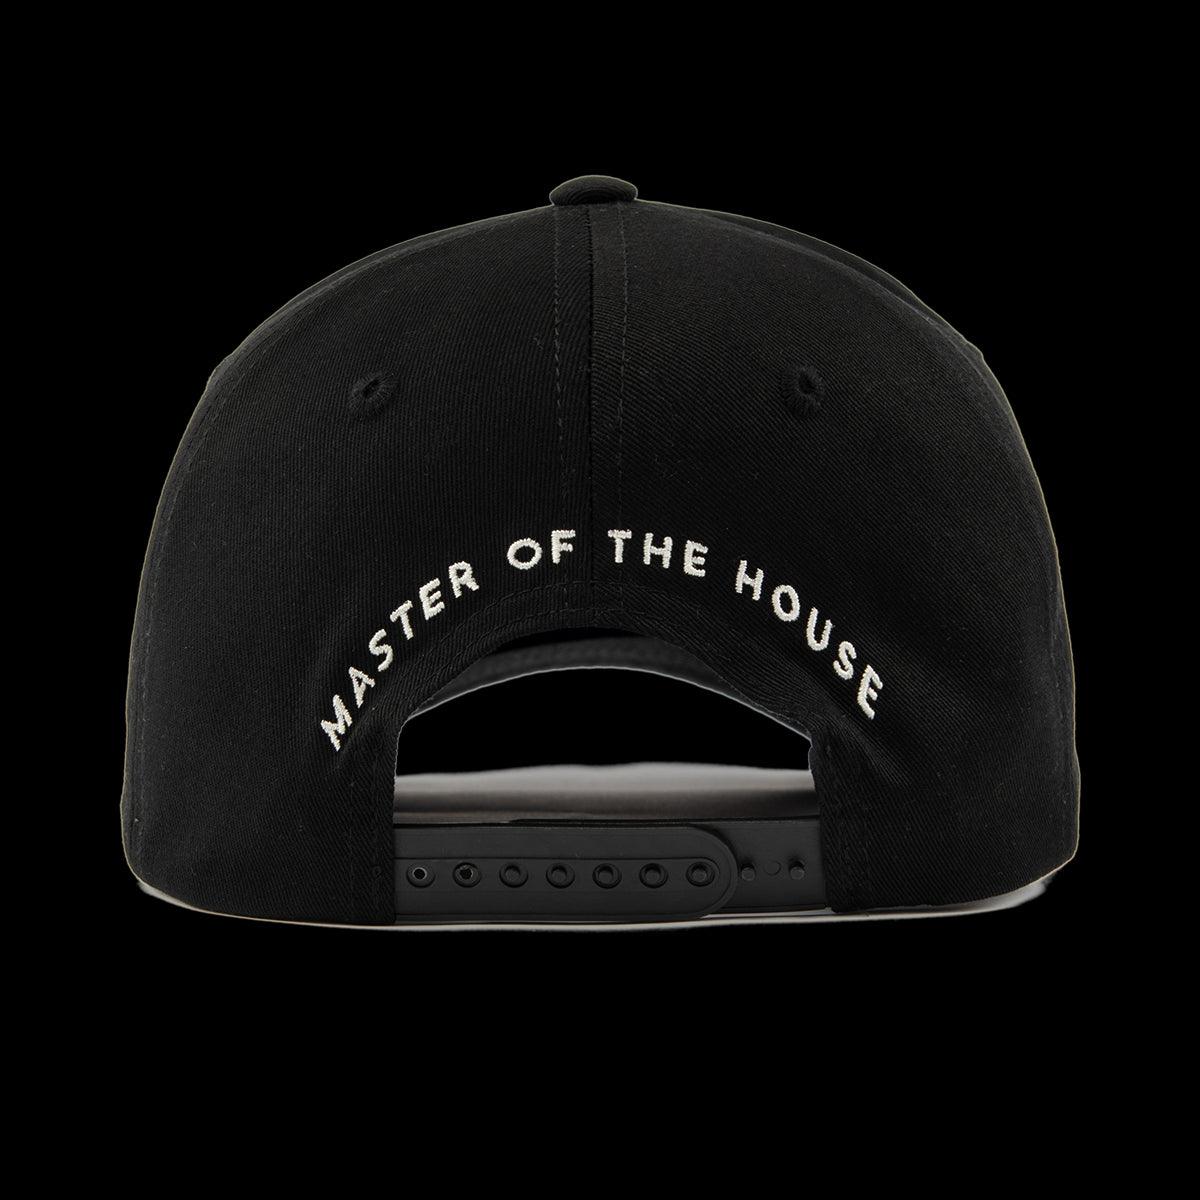 MASTER OF THE HOUSE Popper Cap by Master of the House